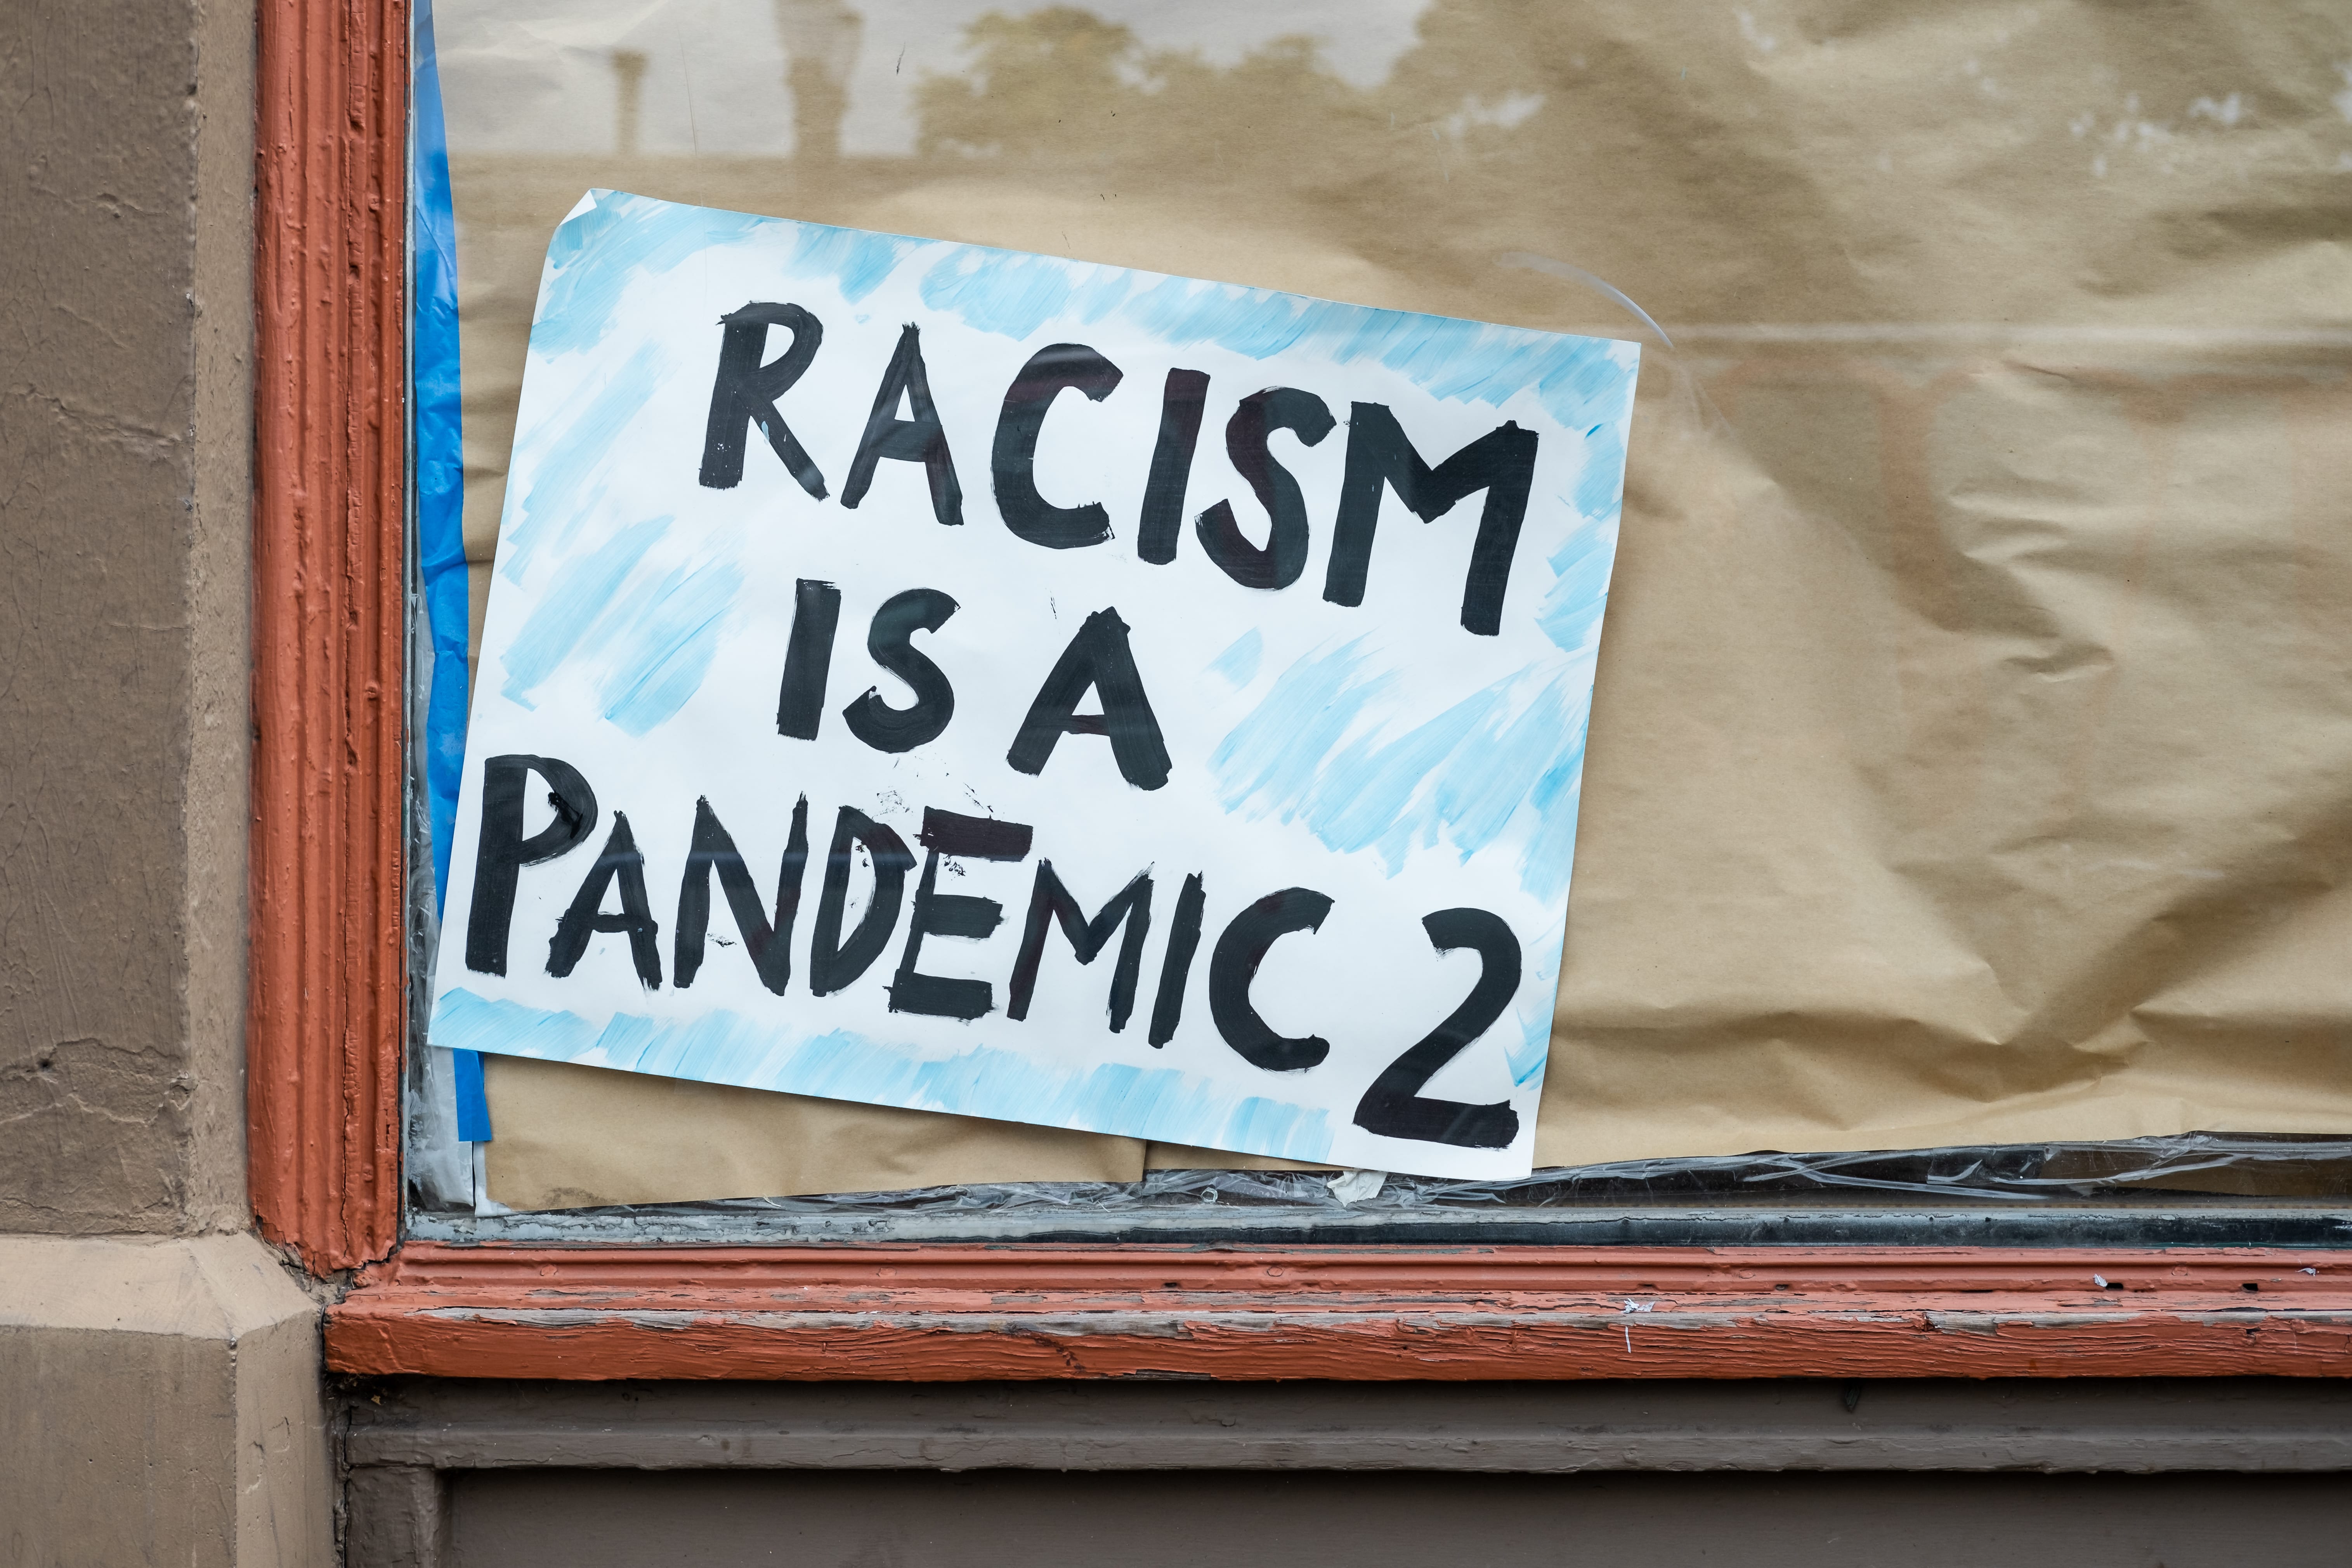 Sign in the window of a Portland, Oregon store saying that racism is a pandemic. Bringing attention to racists and systemic racism in America.